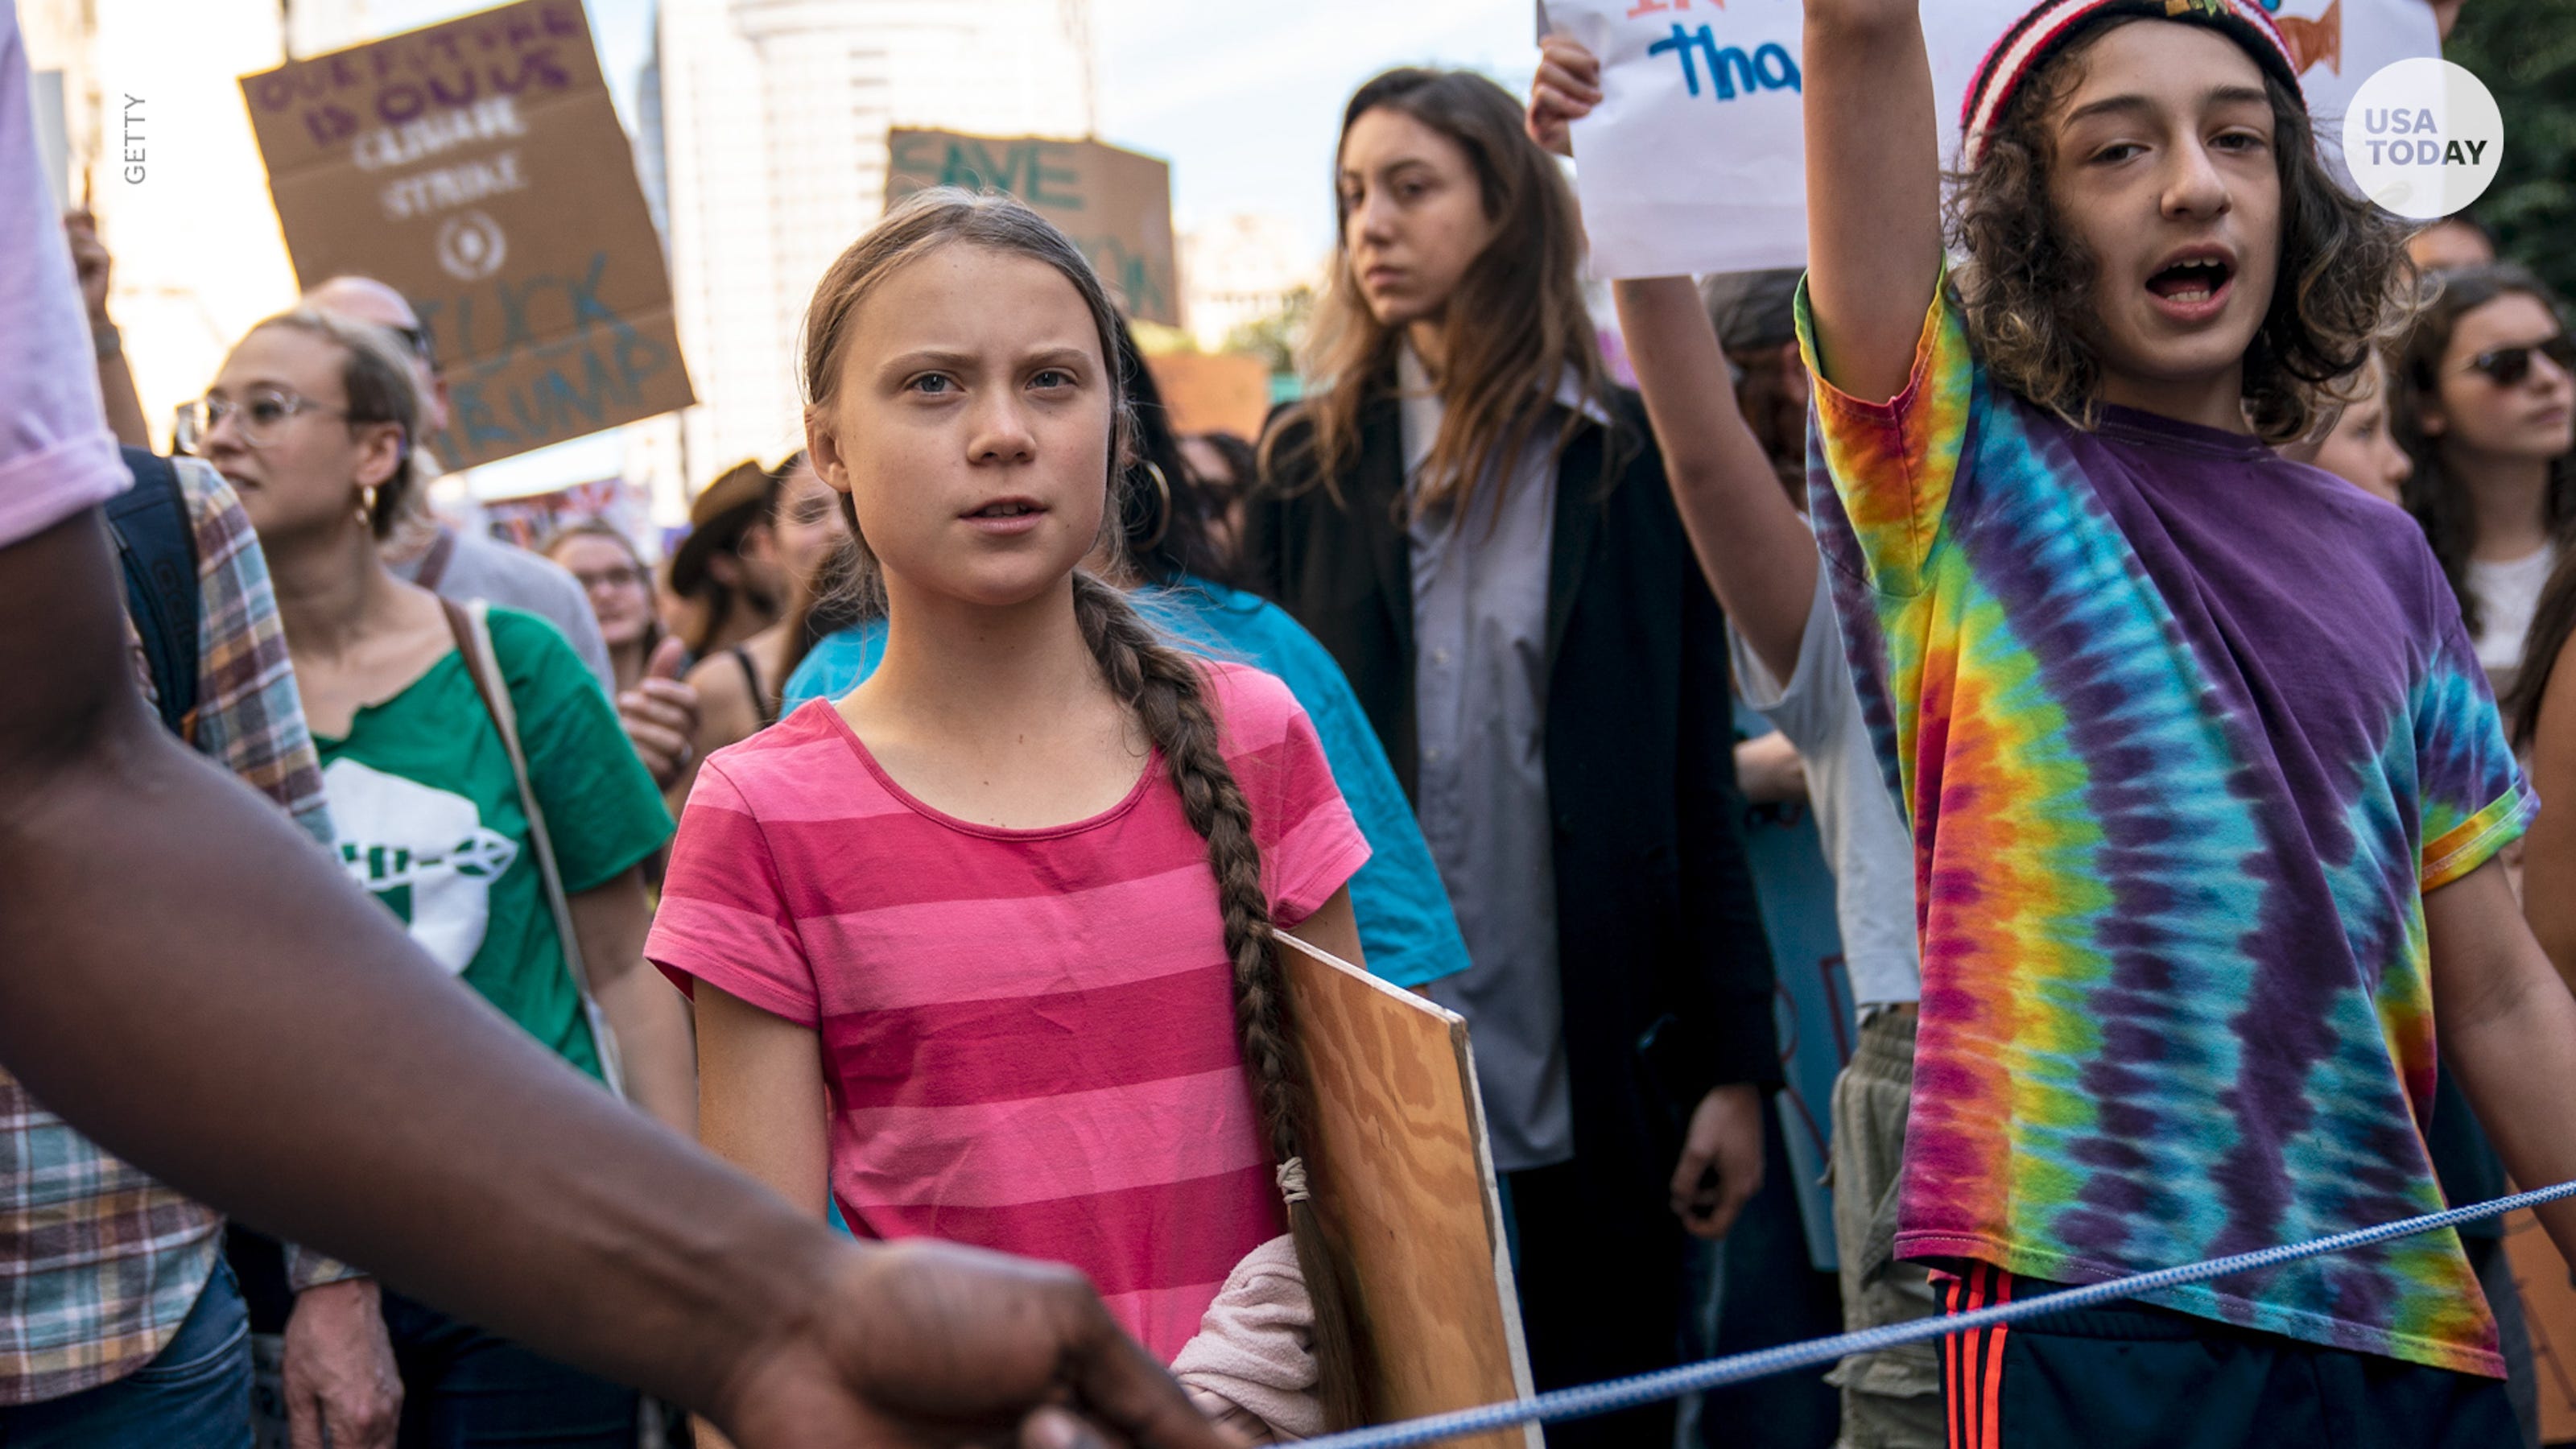 Fox News Apologizes To Greta Thunberg After Guest Calls Her Mentally Ill